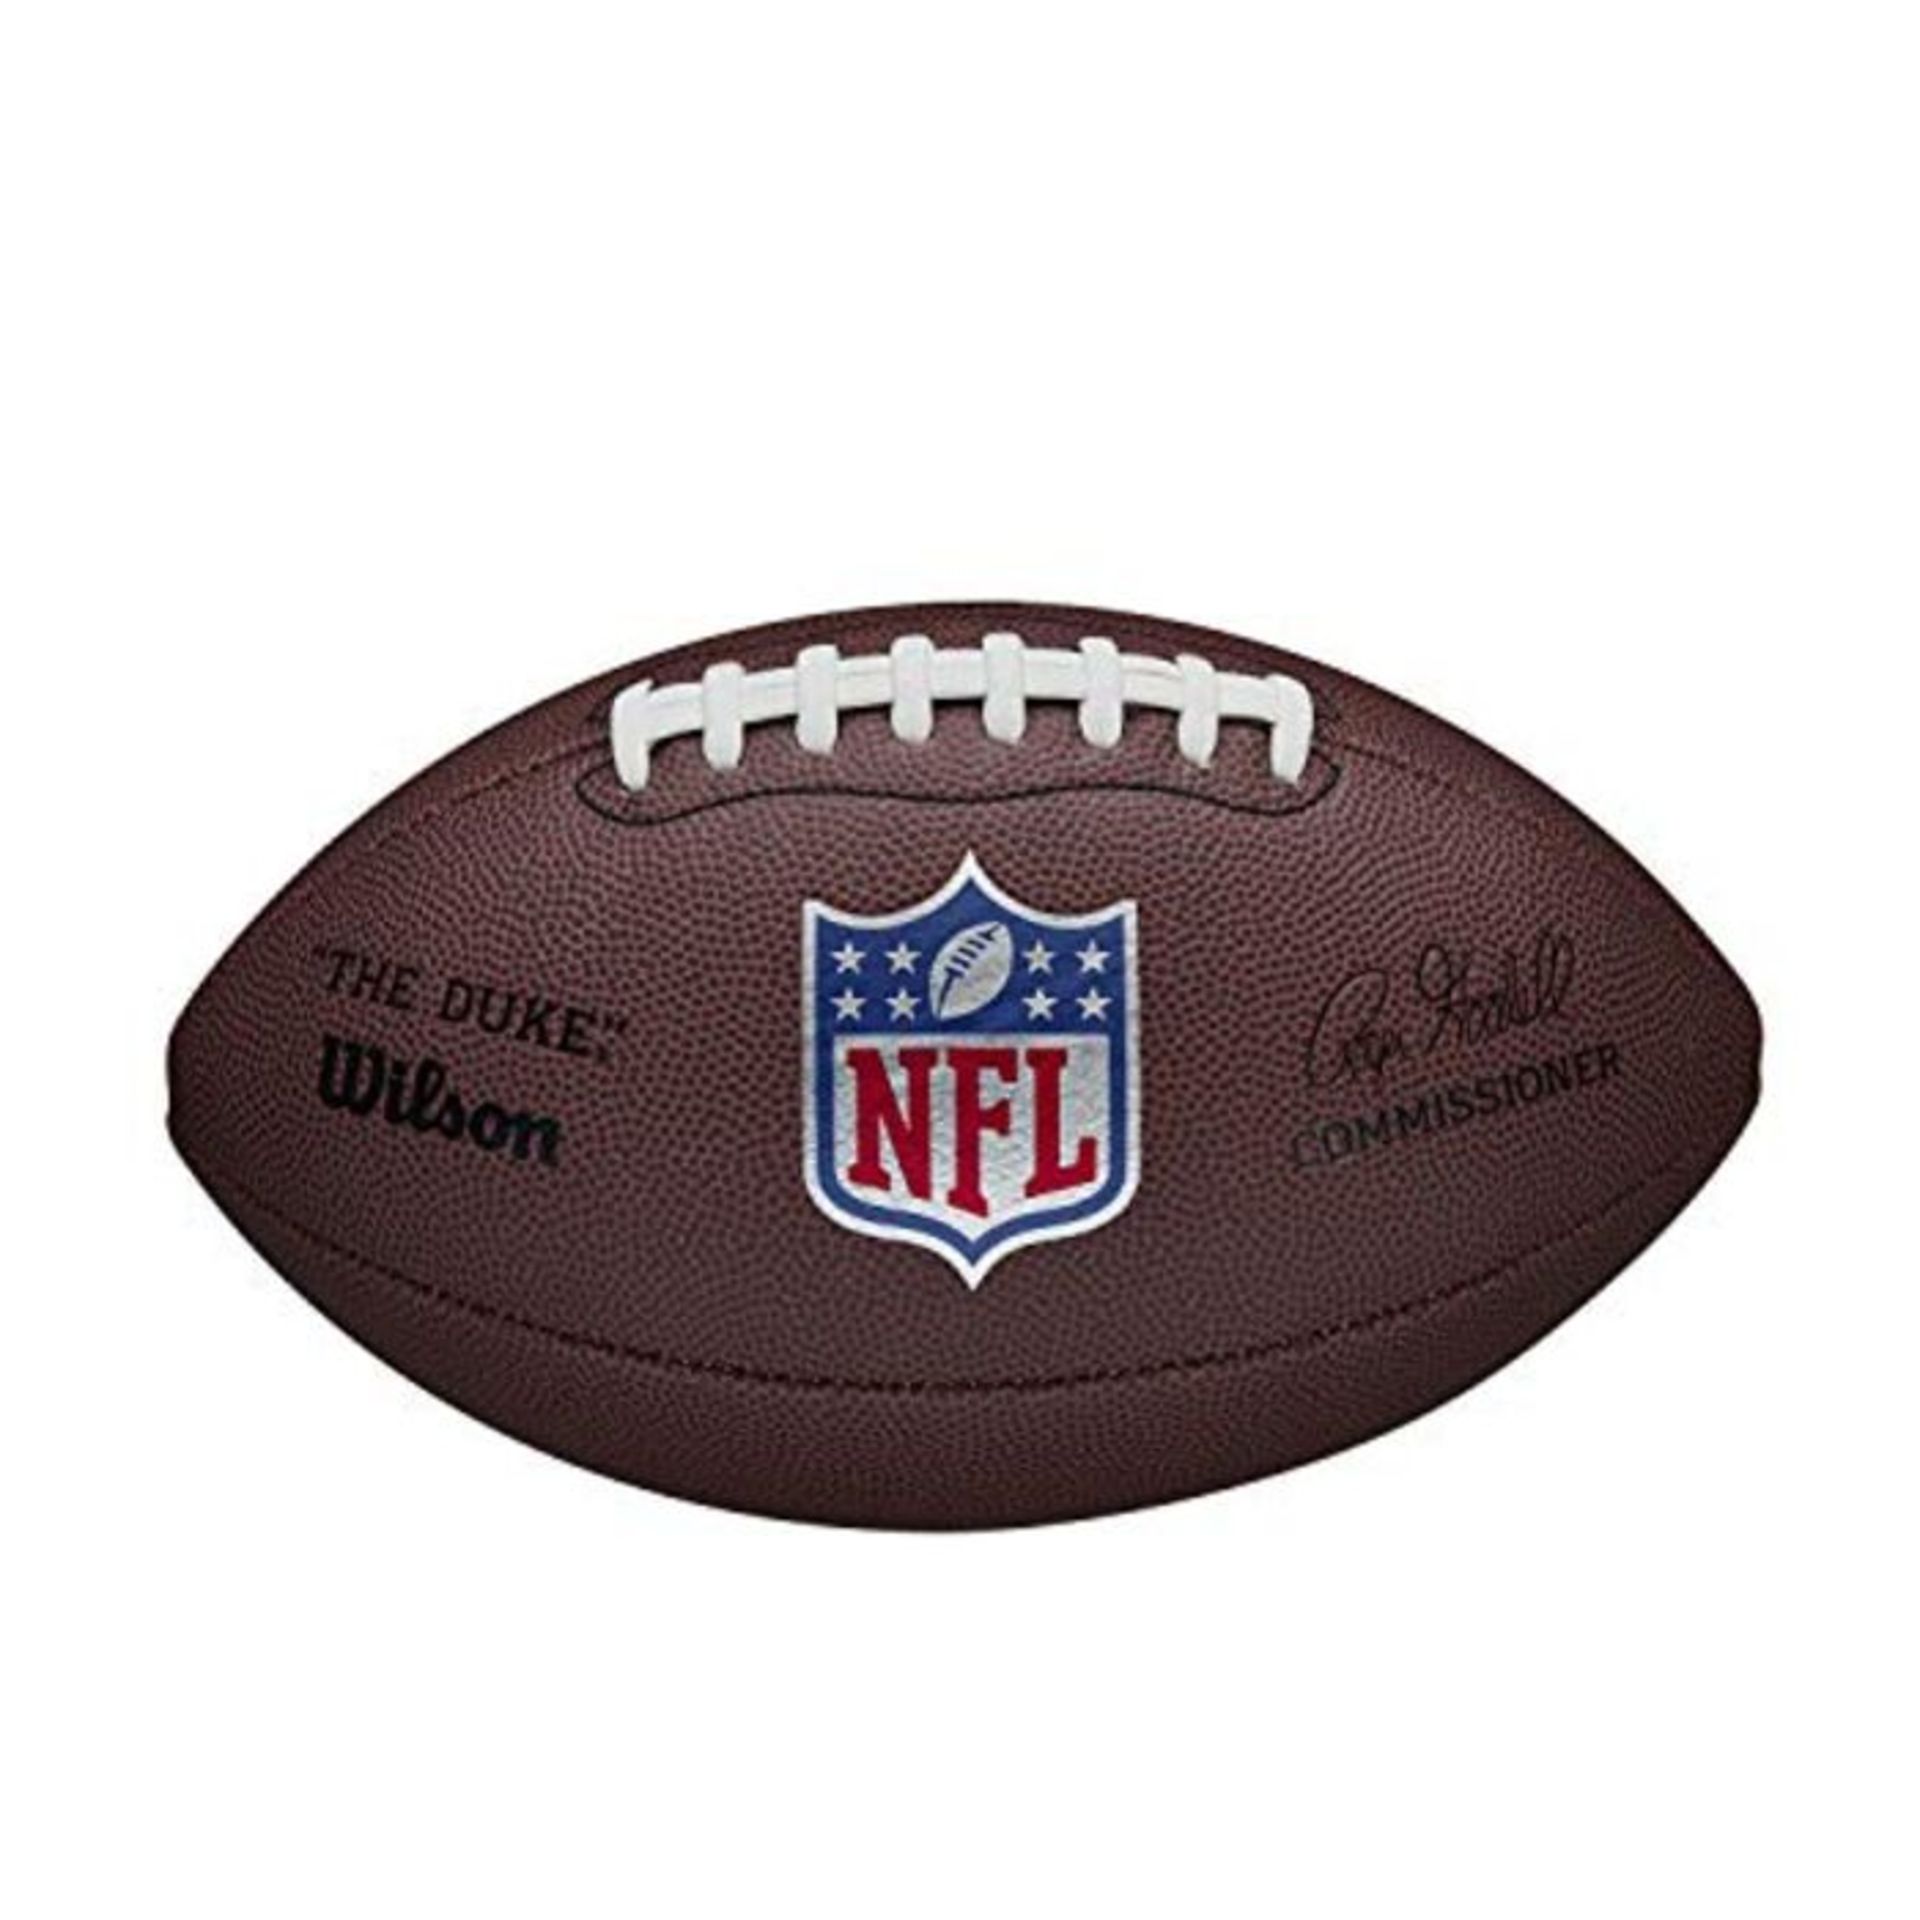 Wilson NFL DUKE REPLICA American Football, Mixed Leather, Official Size, Brown, WTF182